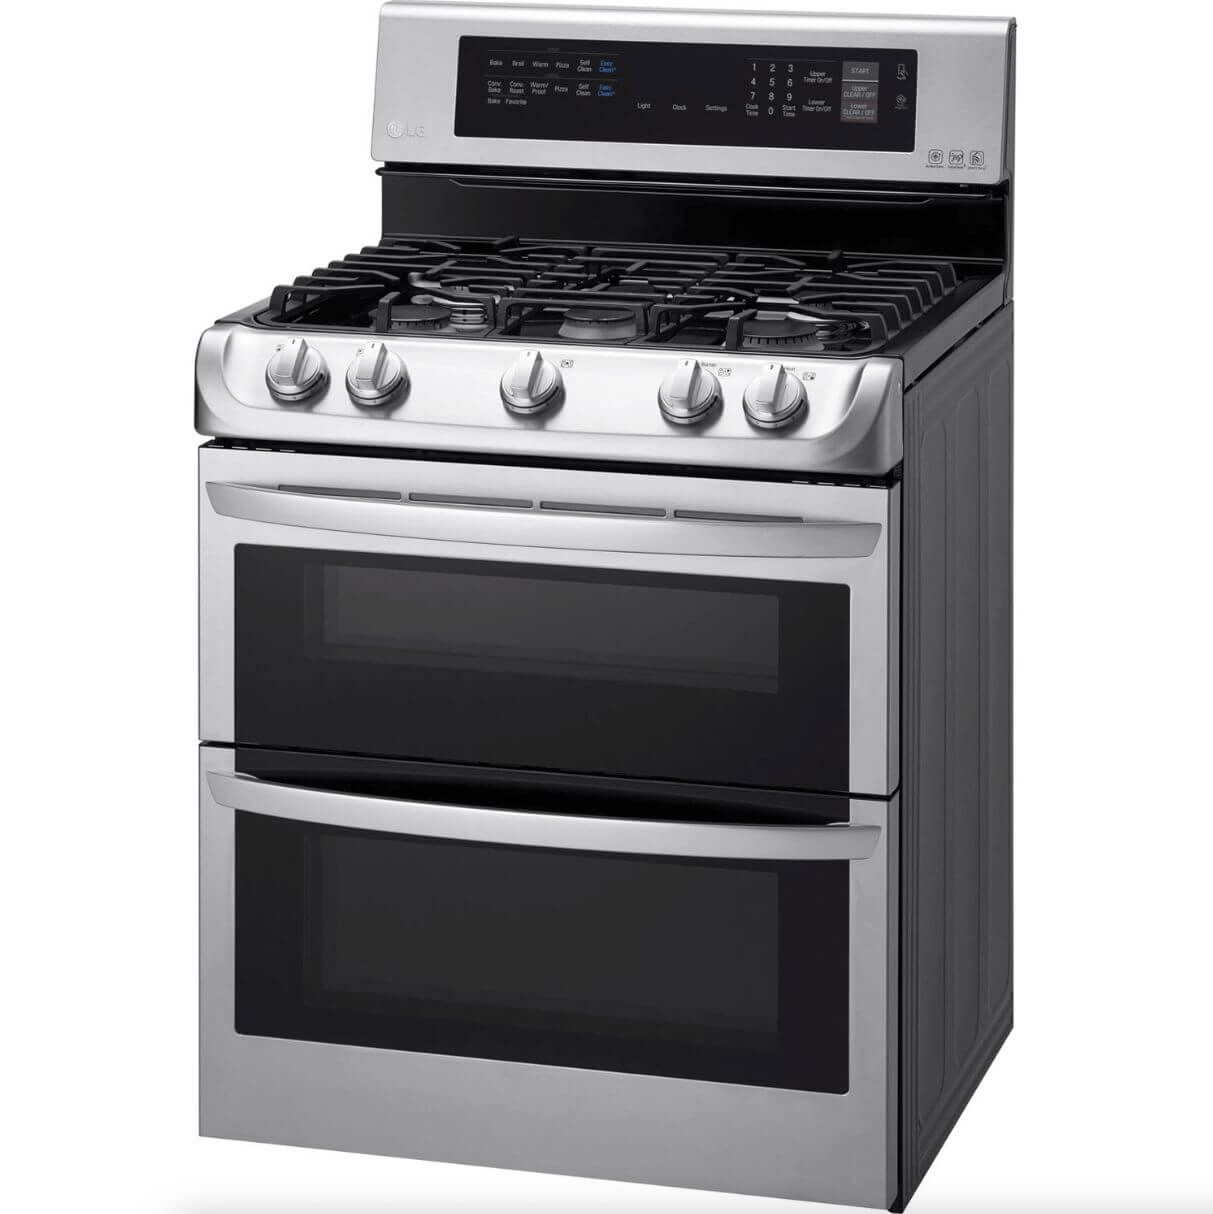 LG 30 Inch Freestanding Gas Range with Double Oven in Stainless Steel 6.9 Cu.Ft. (LDG4313ST)